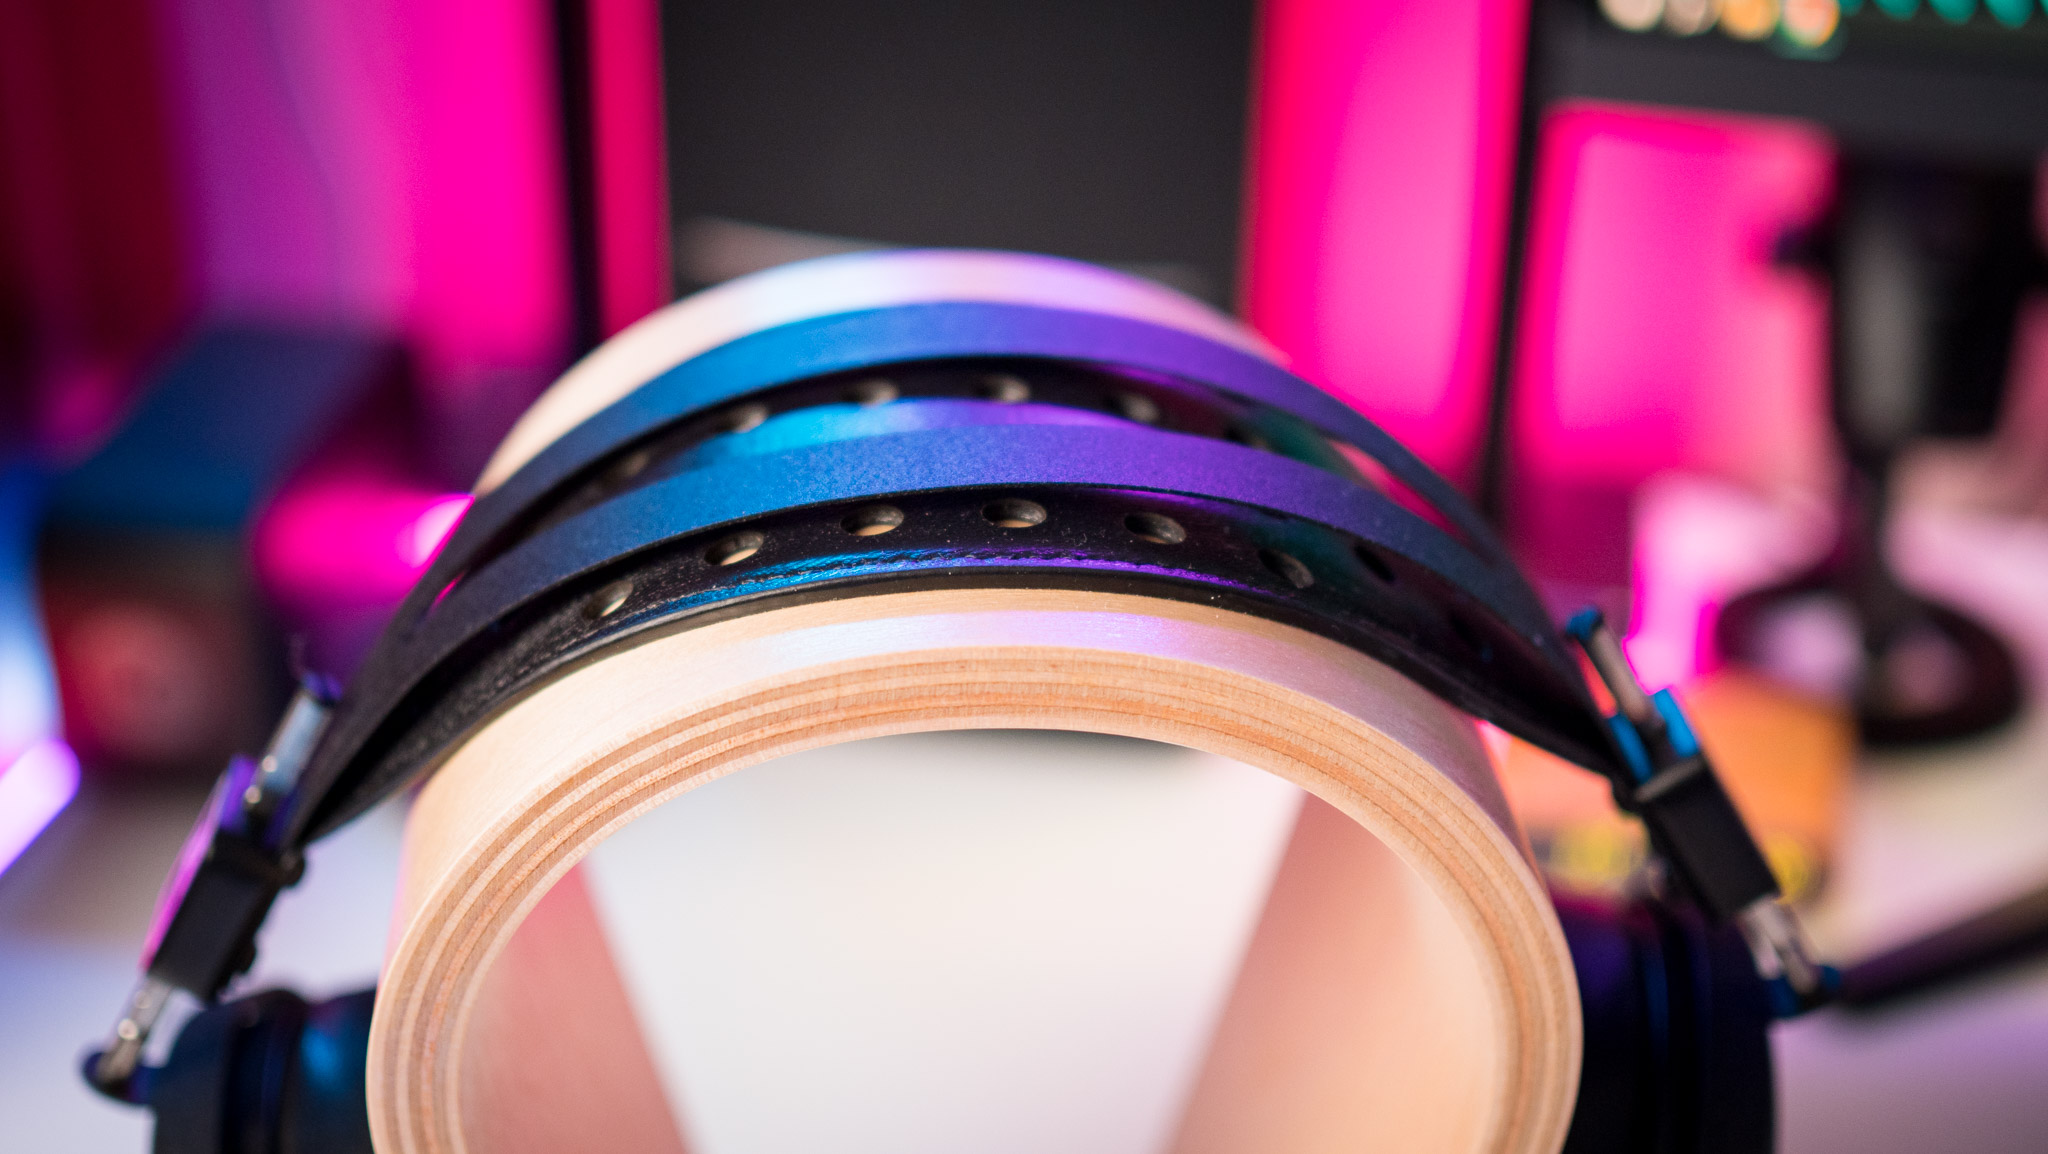 Front view of Audeze LCD-X headband against RGB lighting